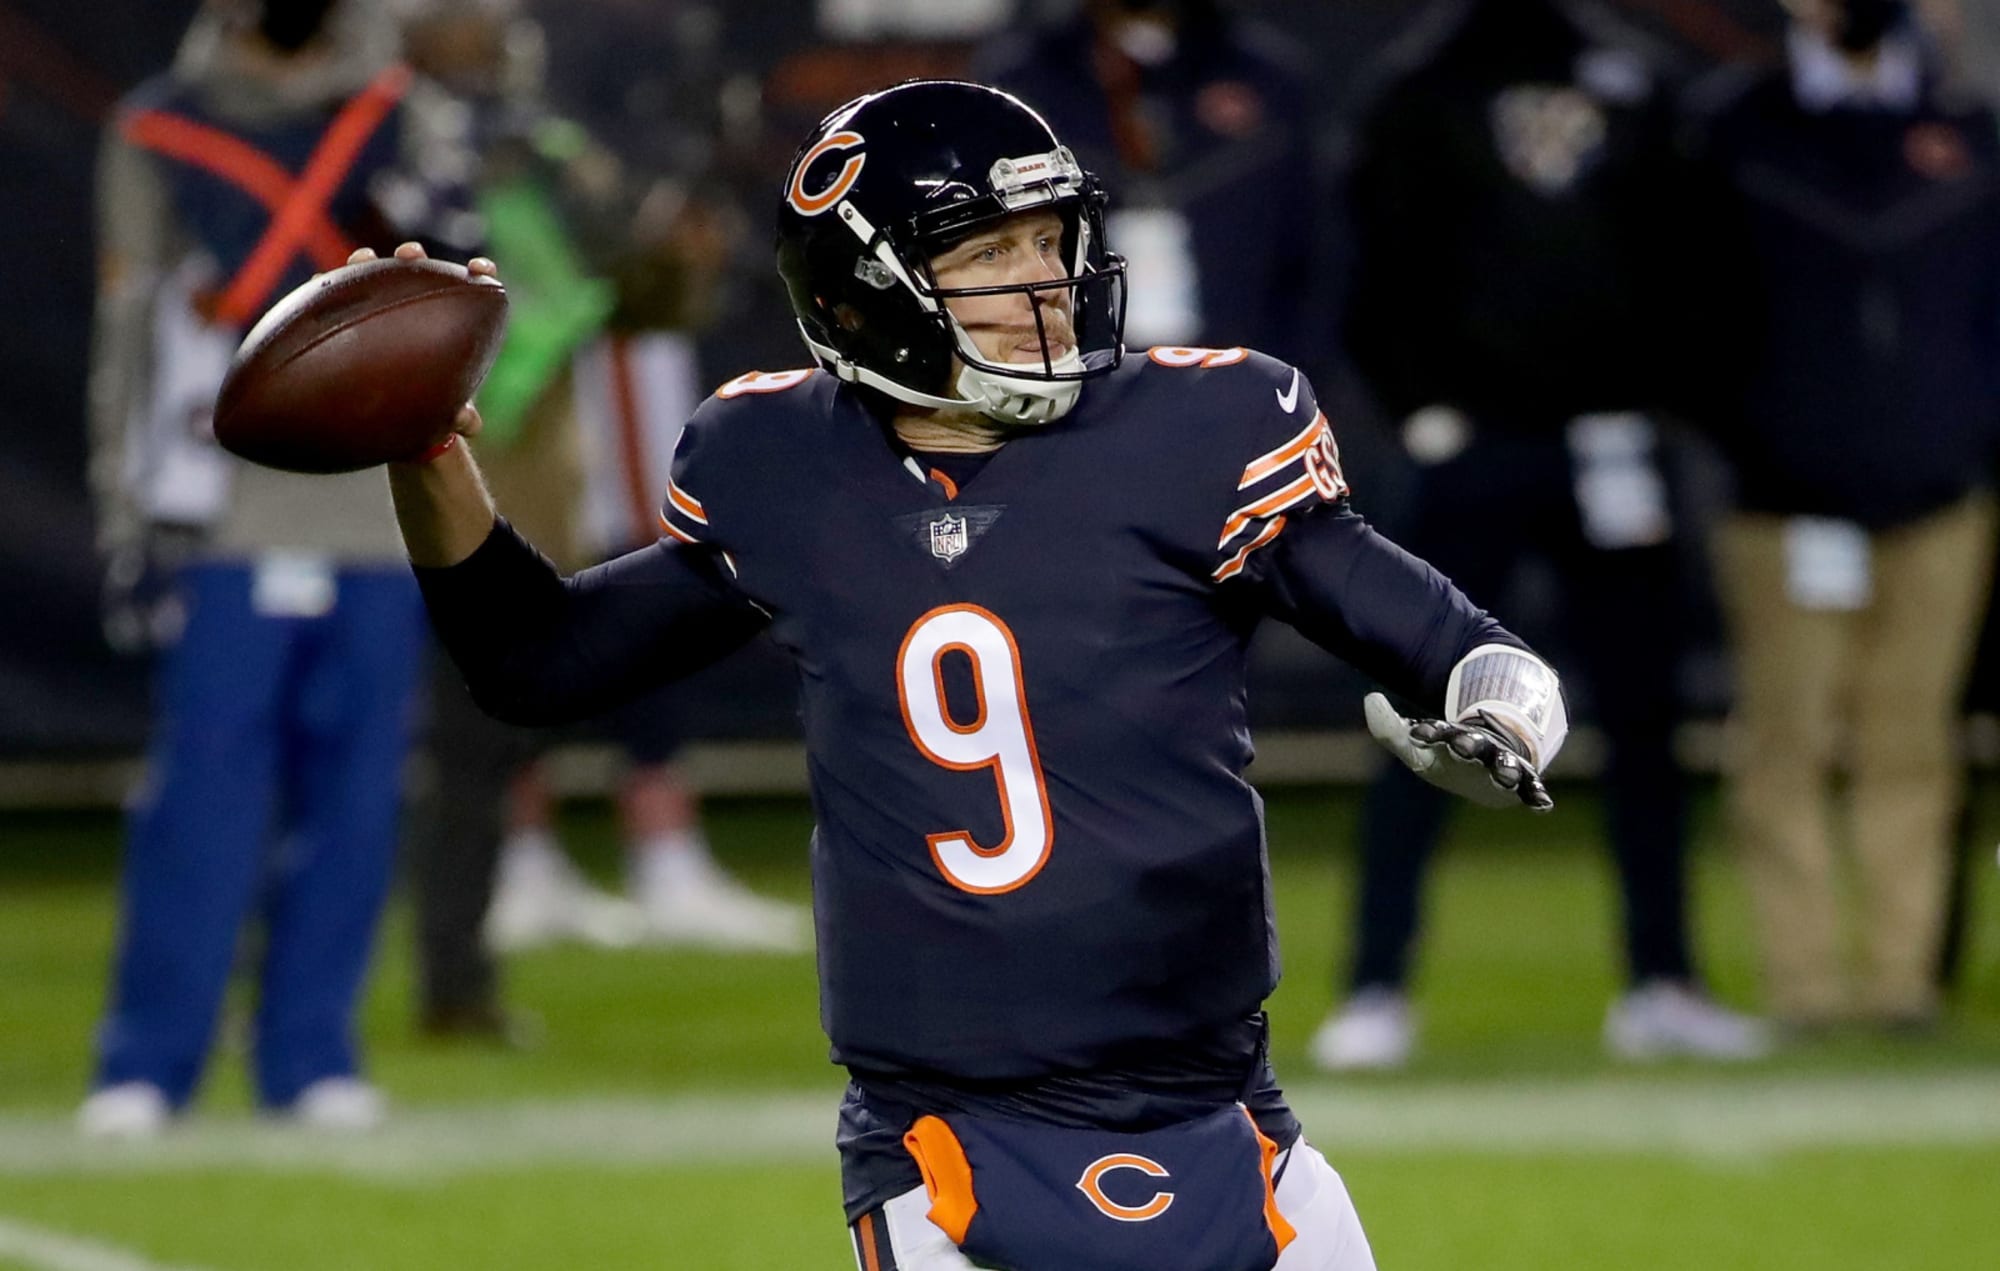 Chicago Bears Thursday Night Football victory makes a statement